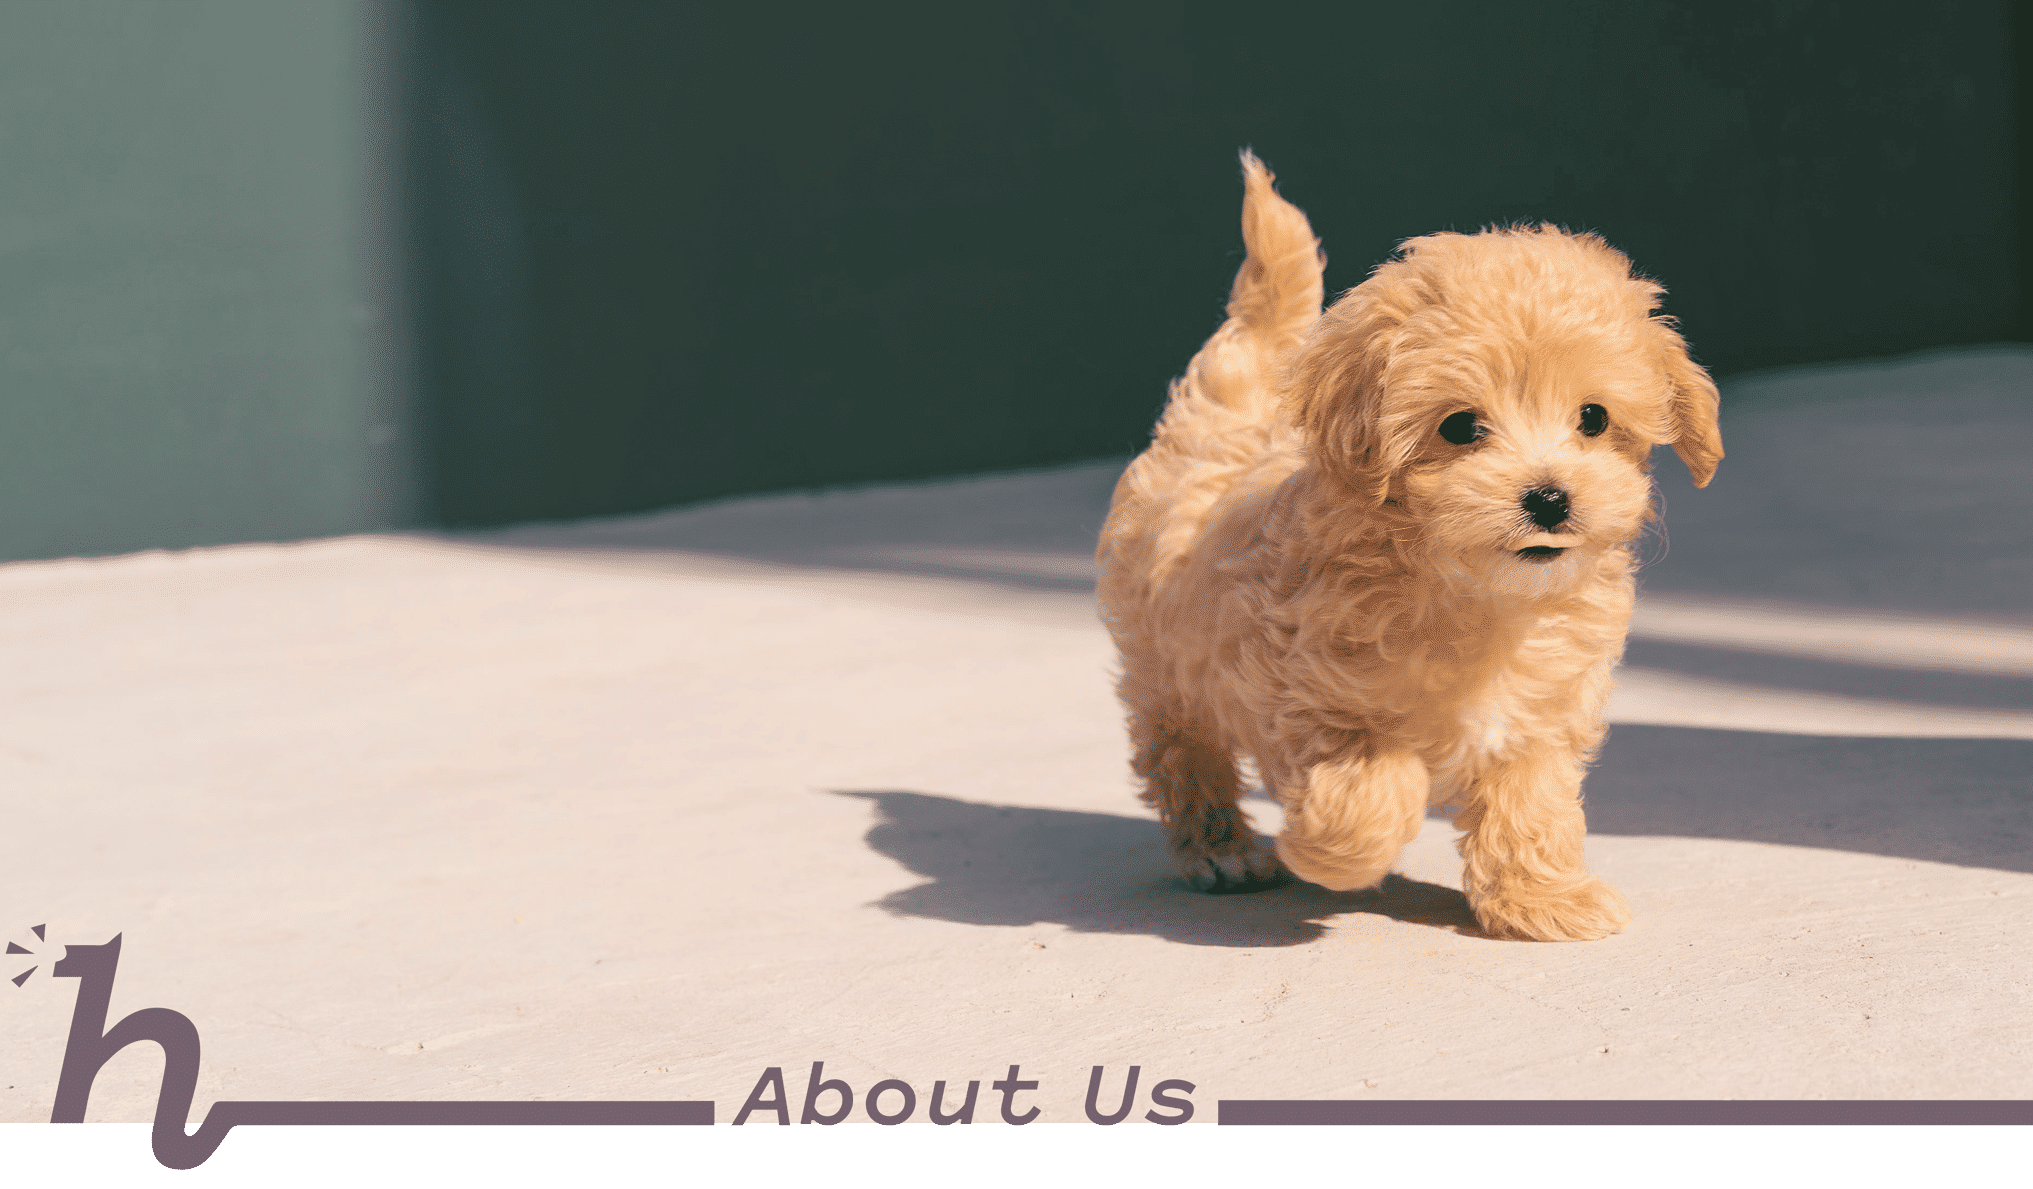 A cute blonde puppy walking towards the camera with the text, "About Us" for Honna's Veterinary